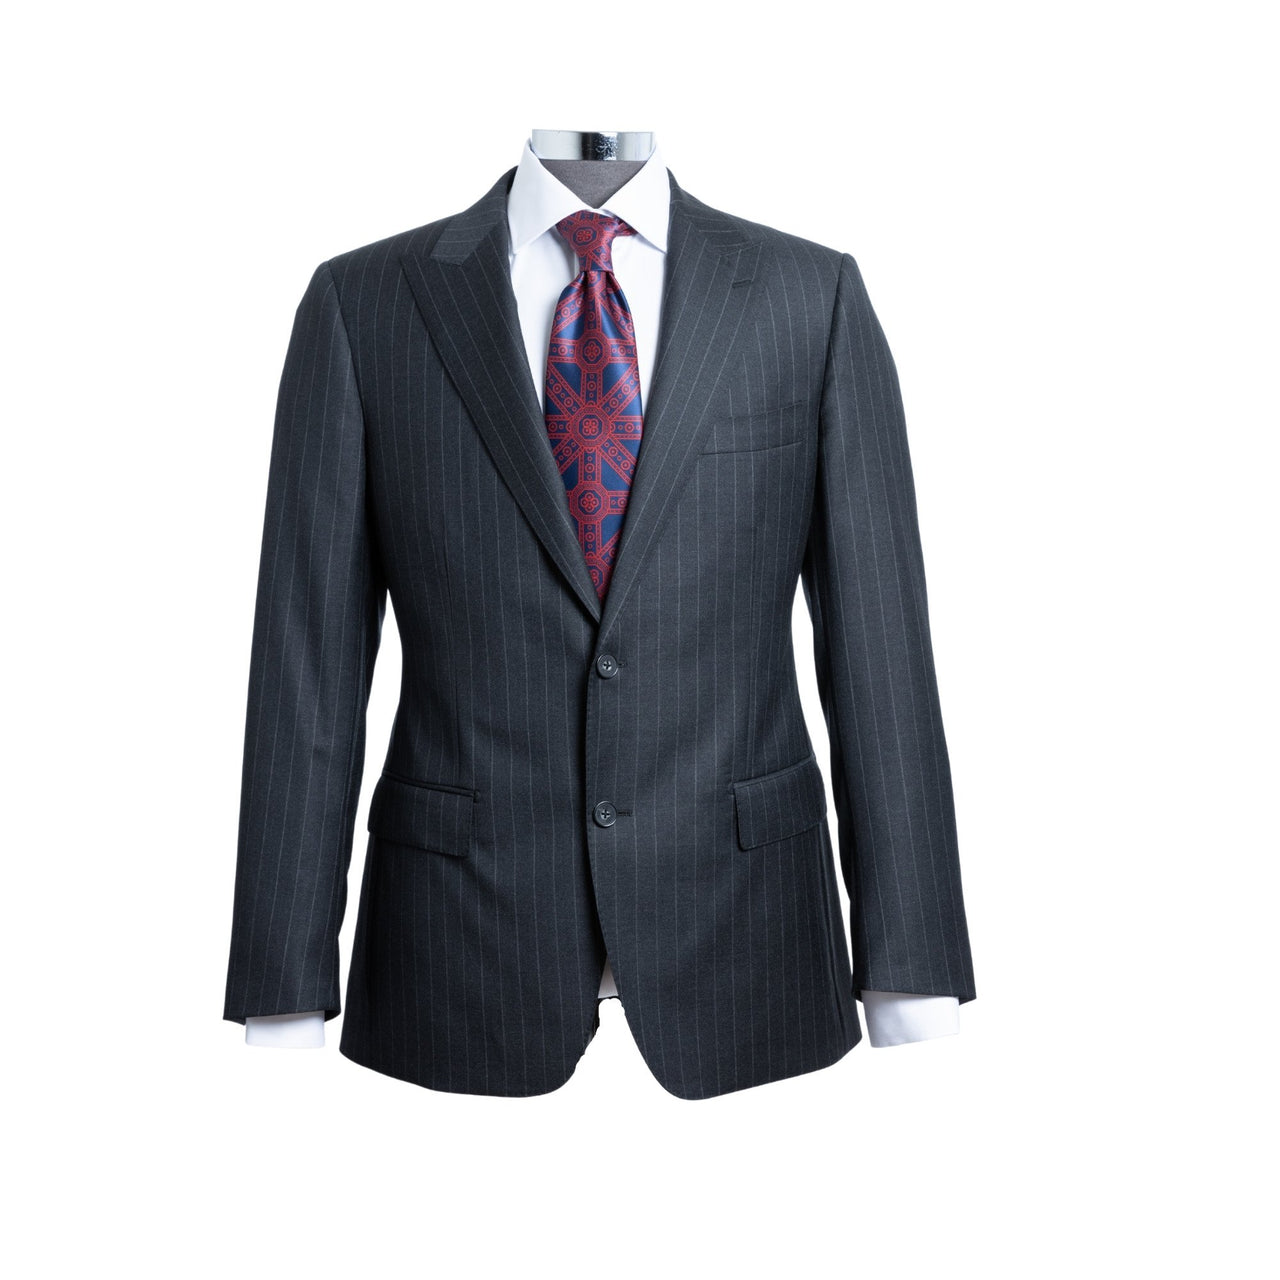 HENRY SARTORIAL Westminster Peak Lapel Suit CHARCOAL STRIPE (Two Trousers)